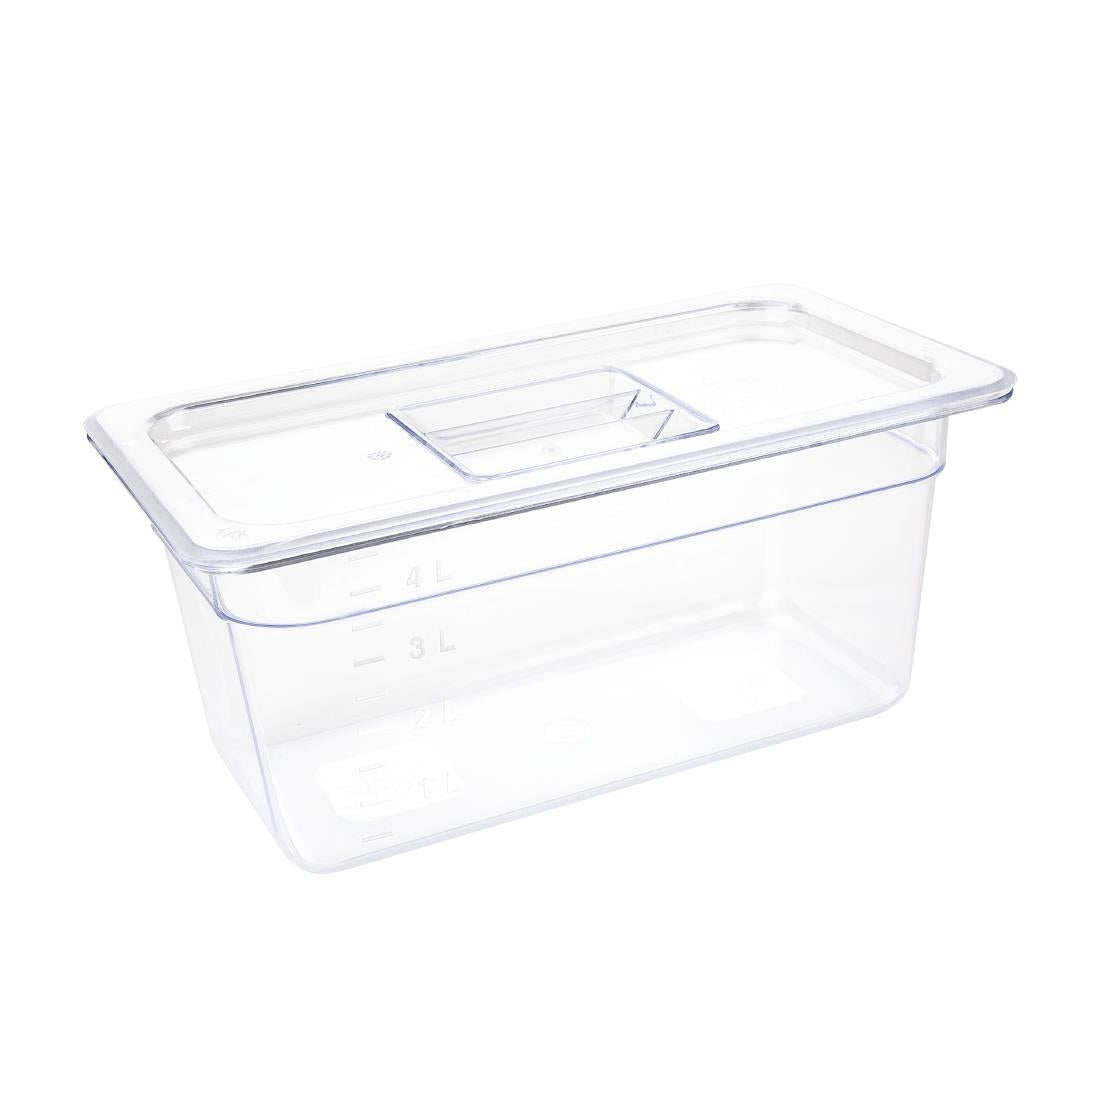 Vogue Polycarbonate 1/3 Gastronorm Container 150mm Clear